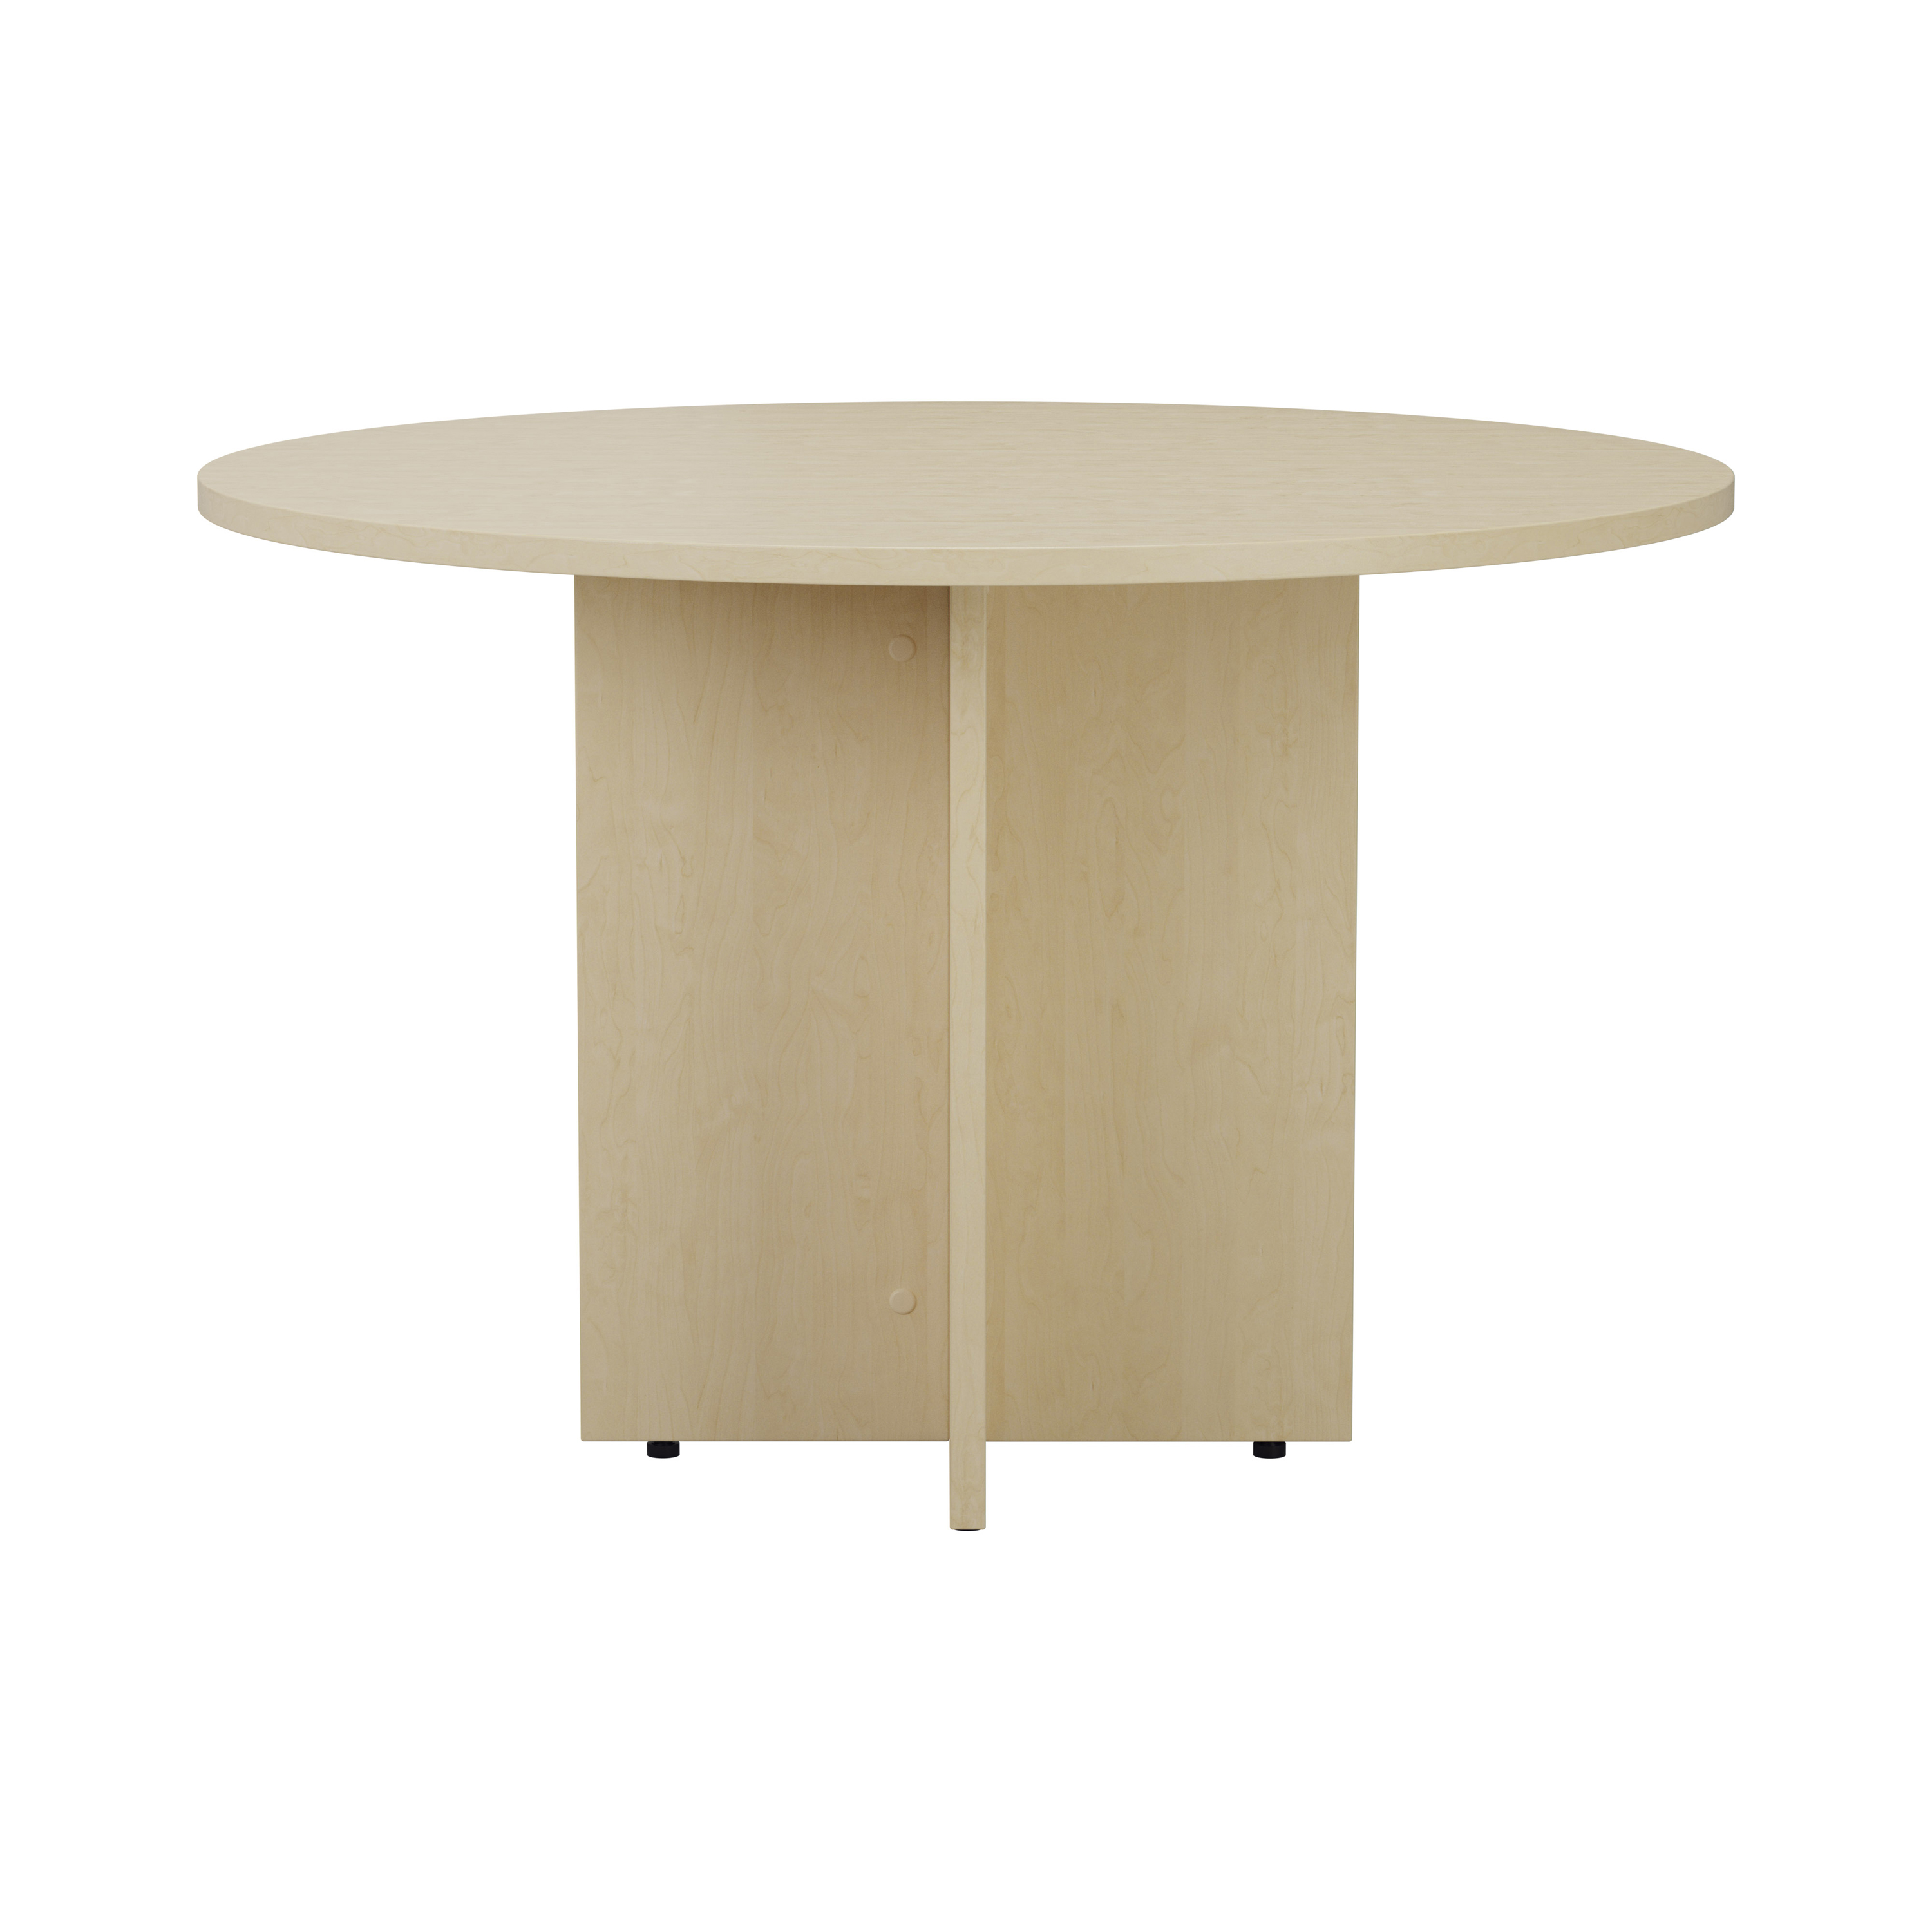 Round Meeting Table - Maple